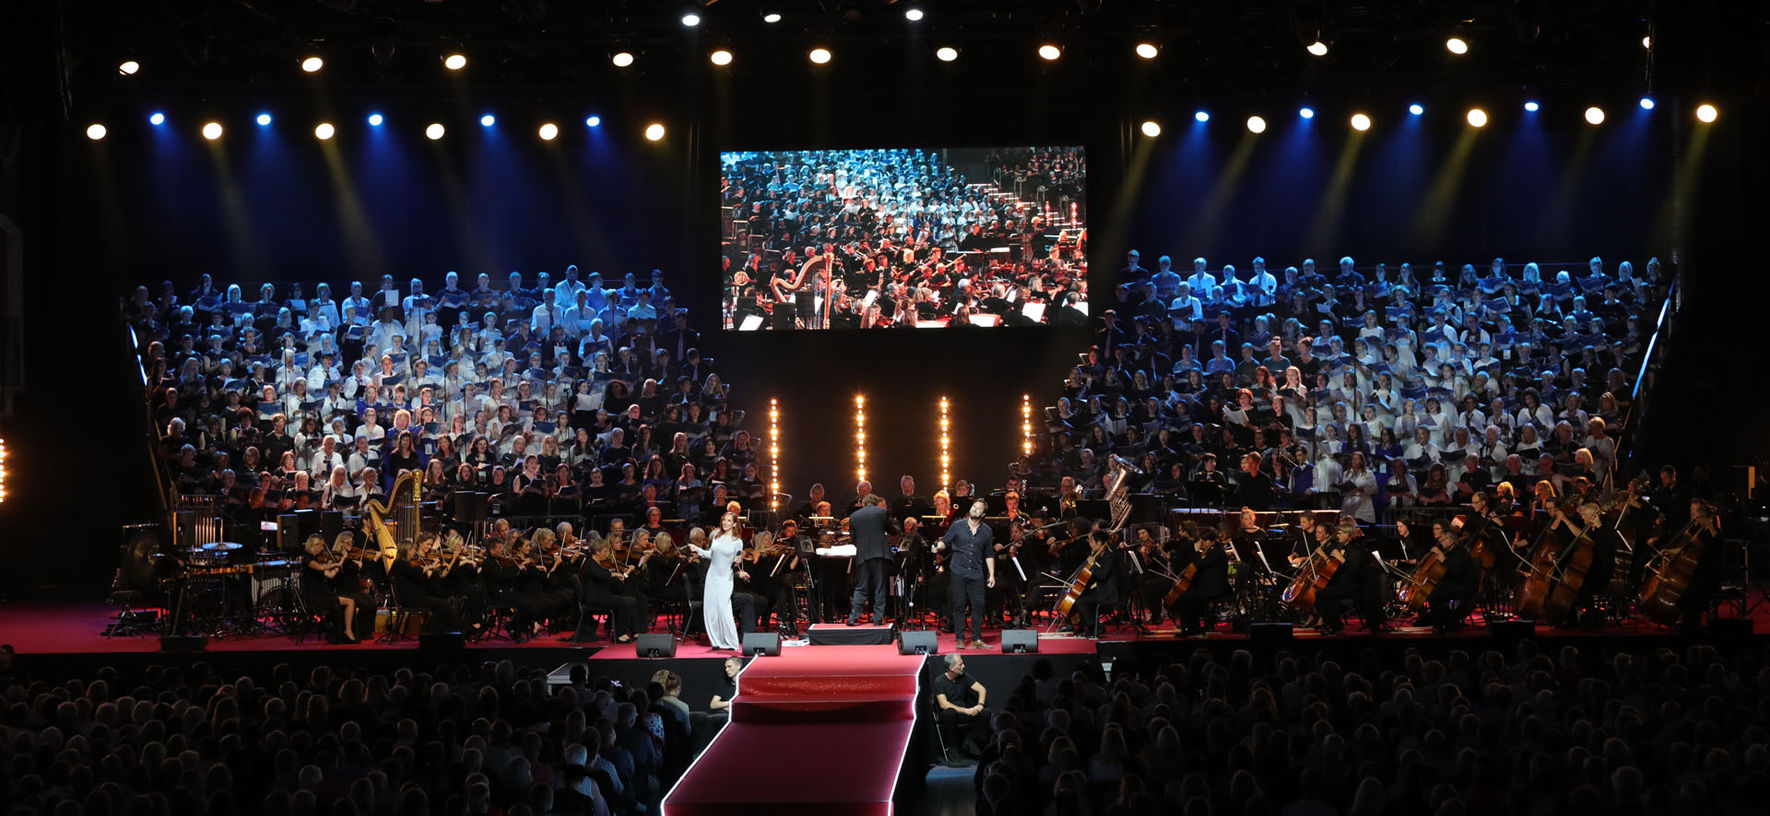 Mass Choir together with orchestra on a huge stage © Studi43